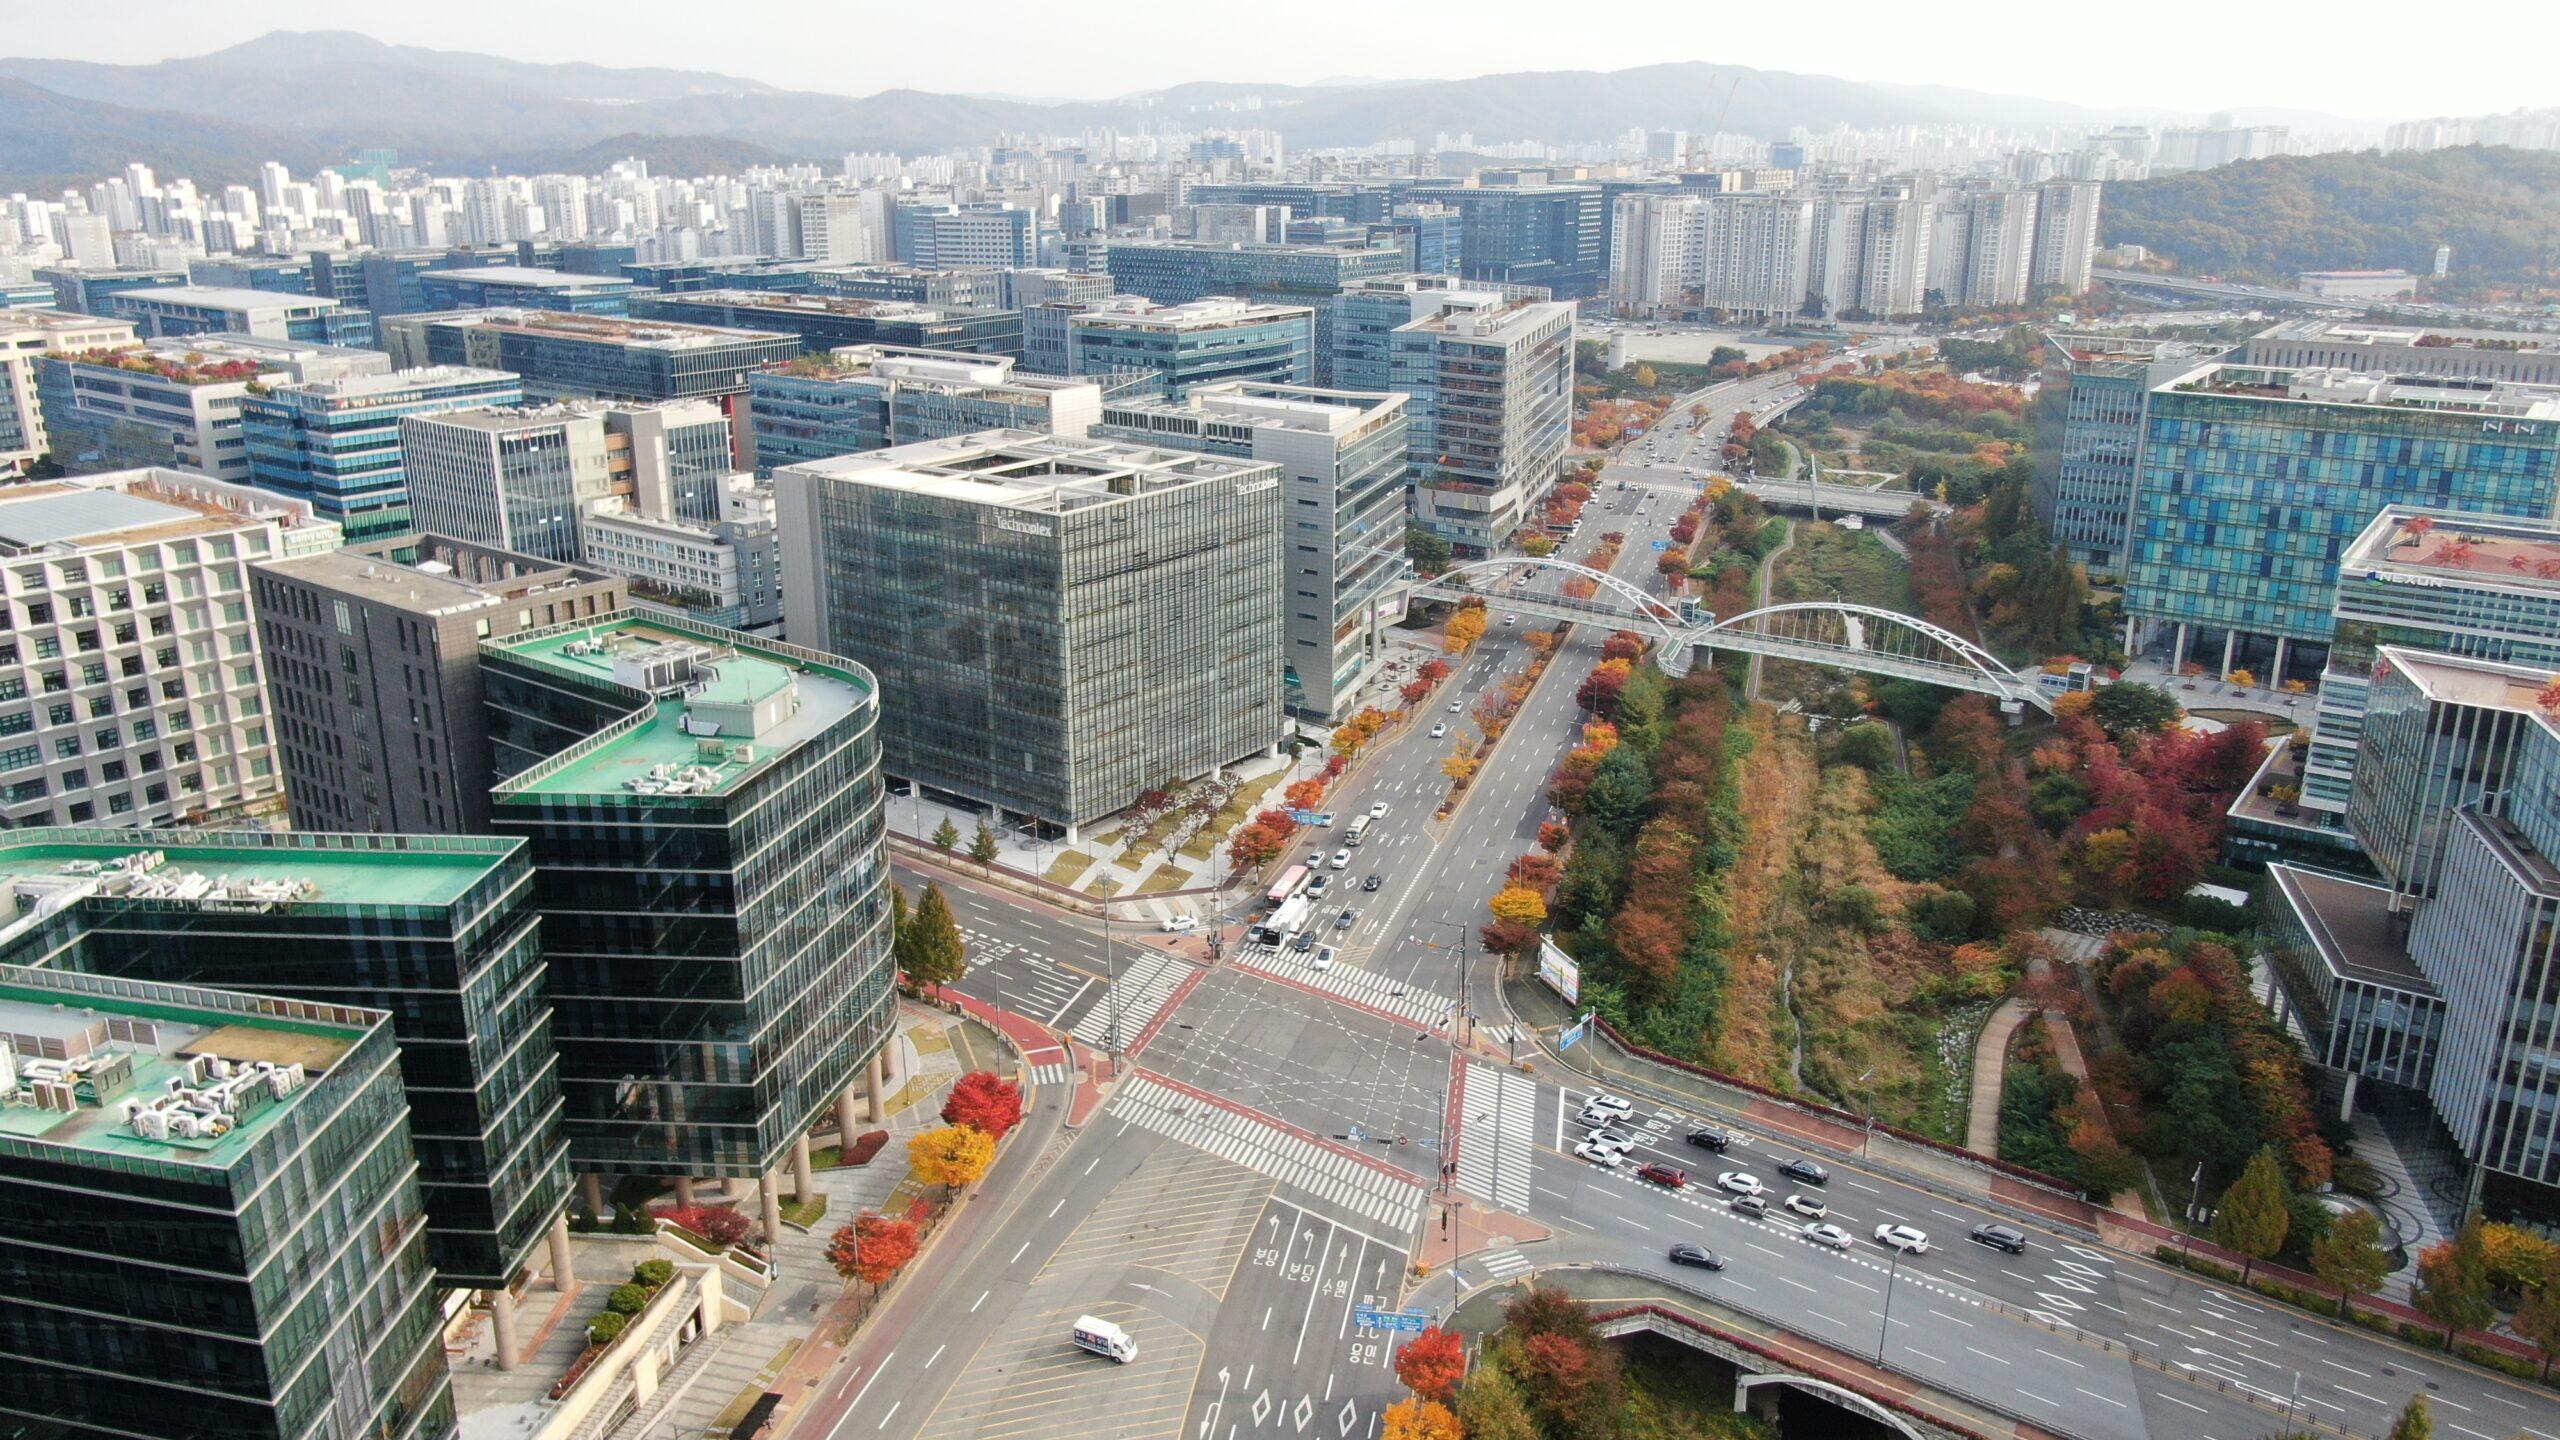 Image source: Pangyo Techno Valley website